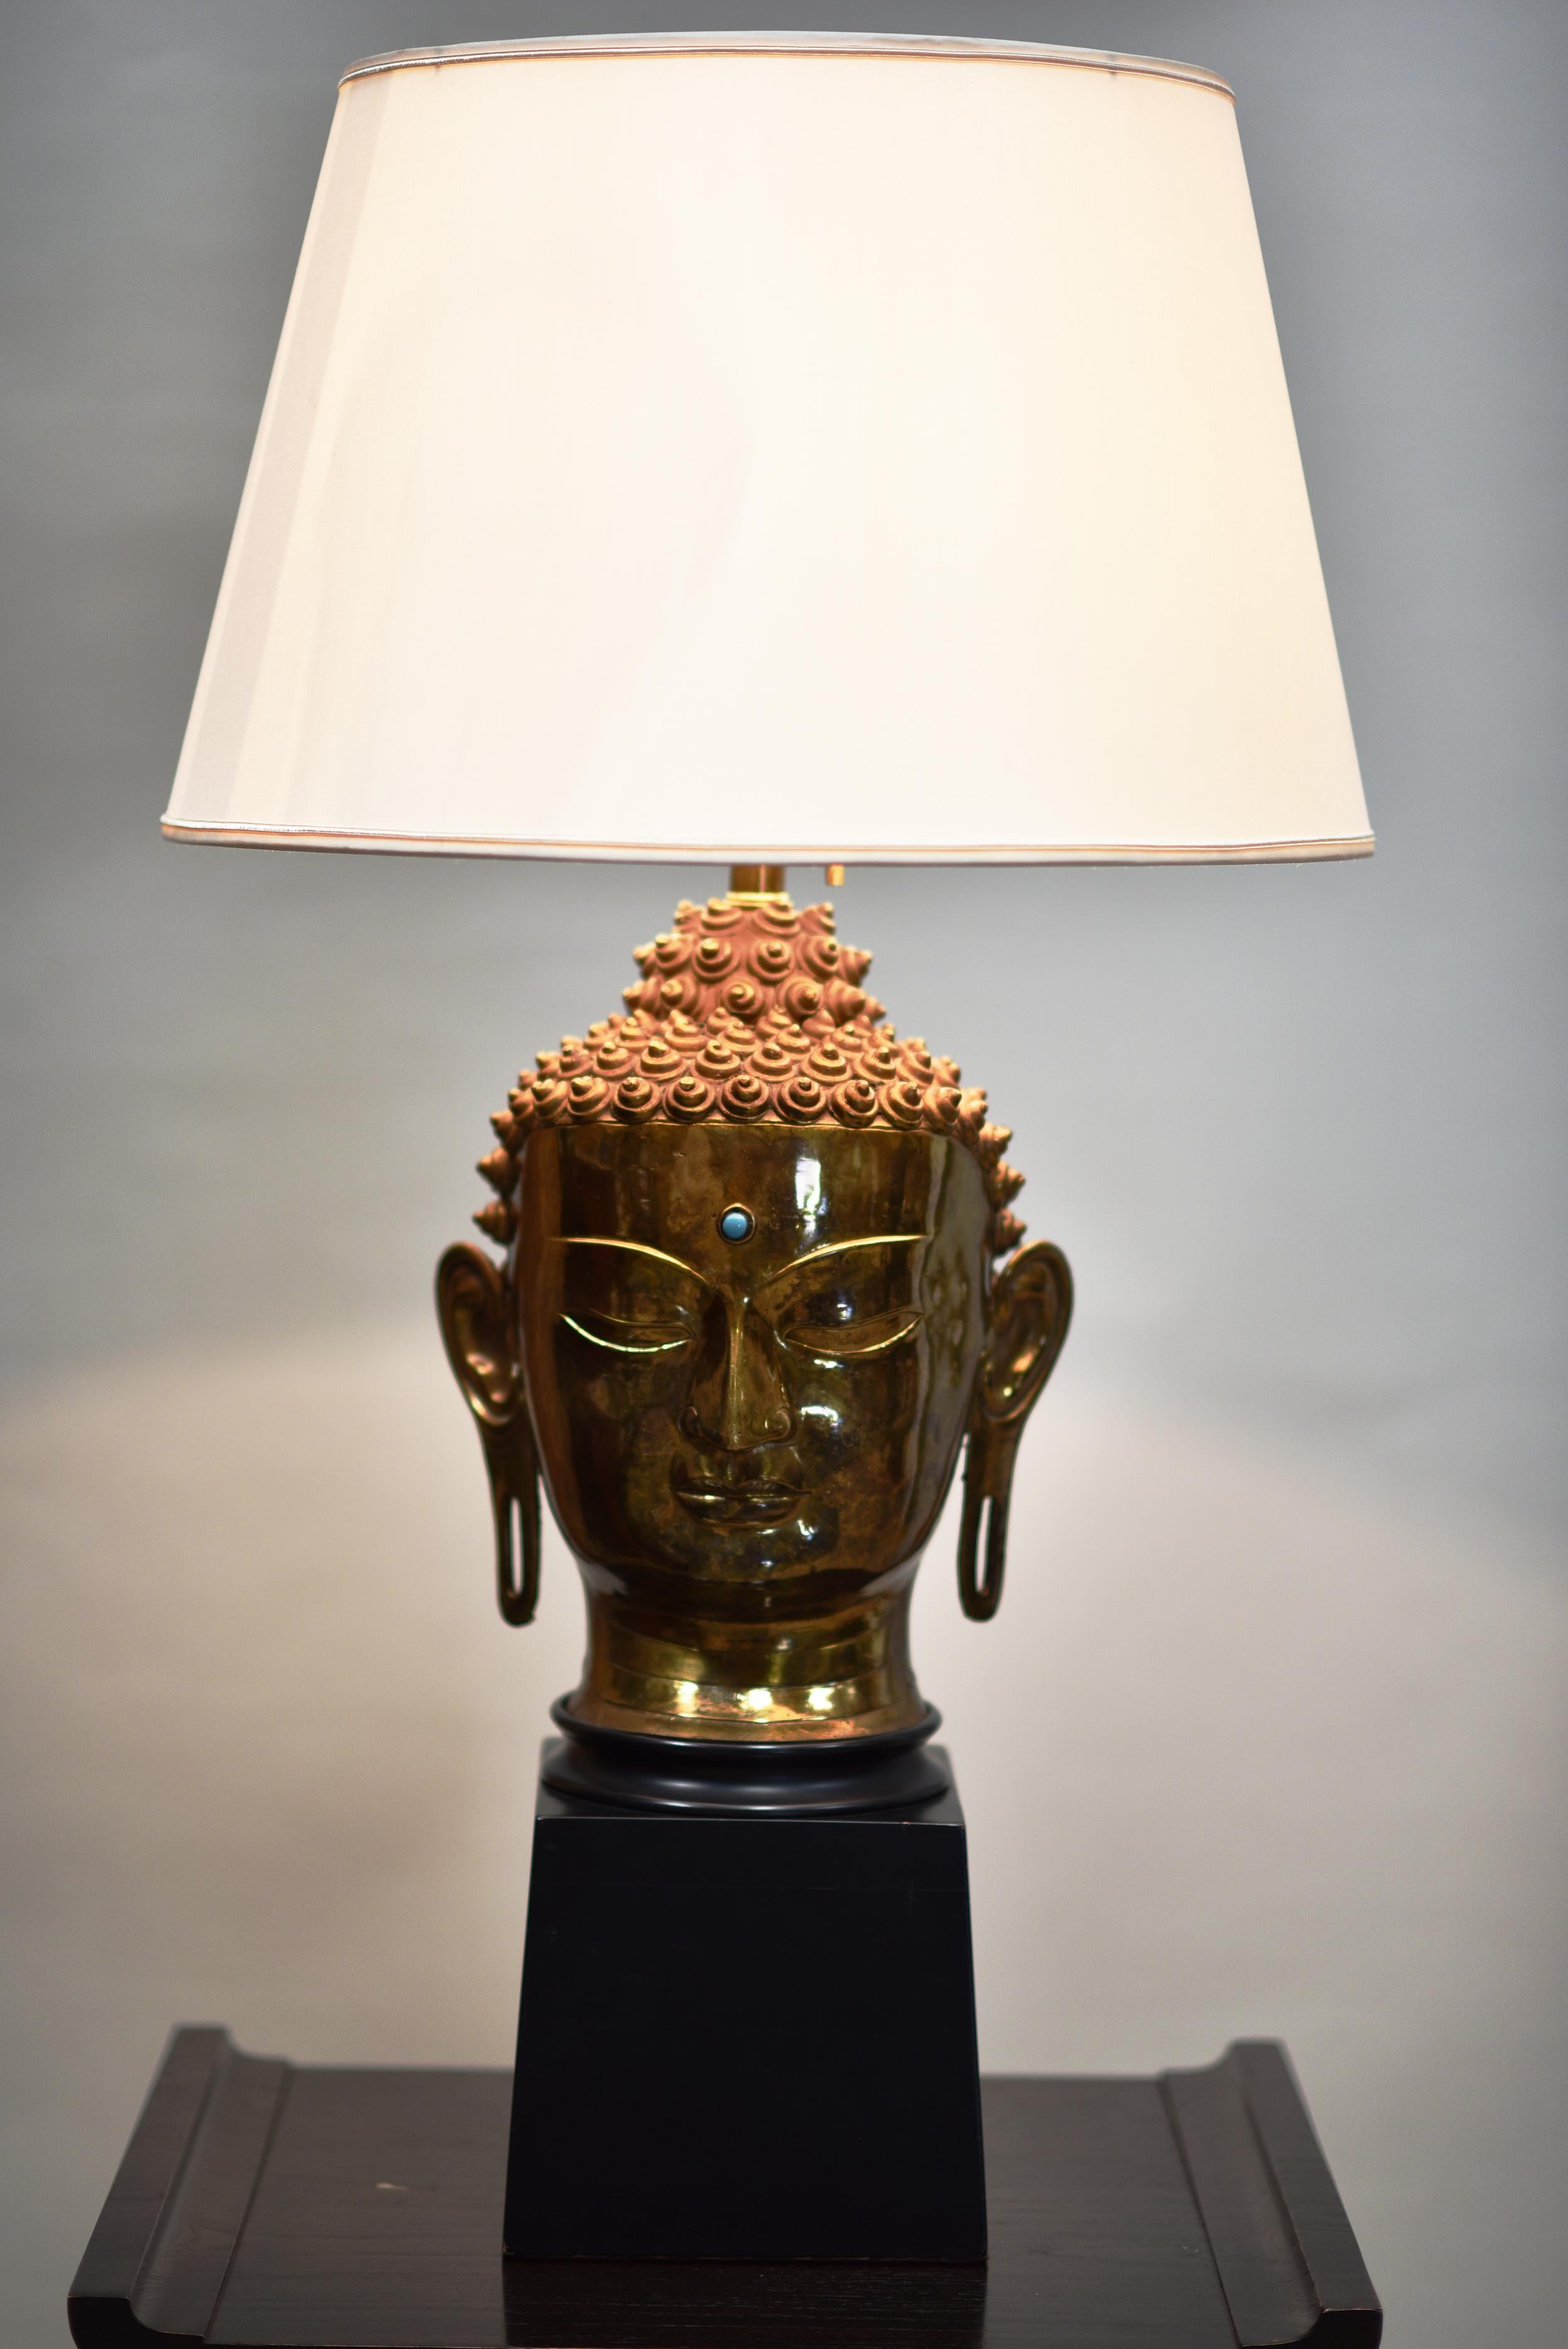 Artist and manufacturer are unknown. This is a beautiful single Hindu head lamp in brass and wood with distinctive marks in headdress and adornments with a jewell in the center of the buddha's head.